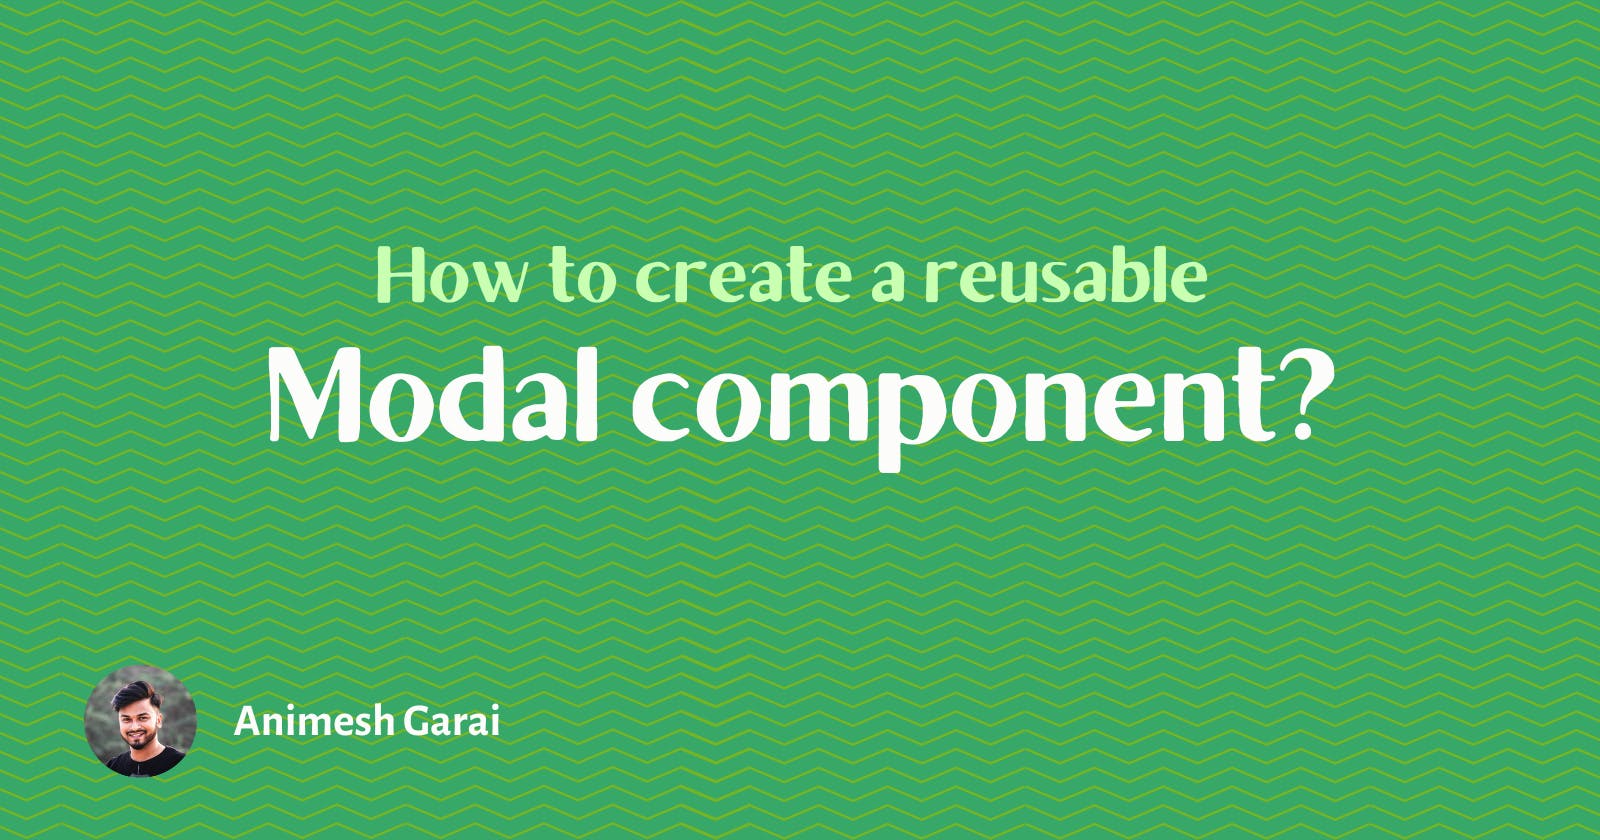 How to create a reusable modal component?